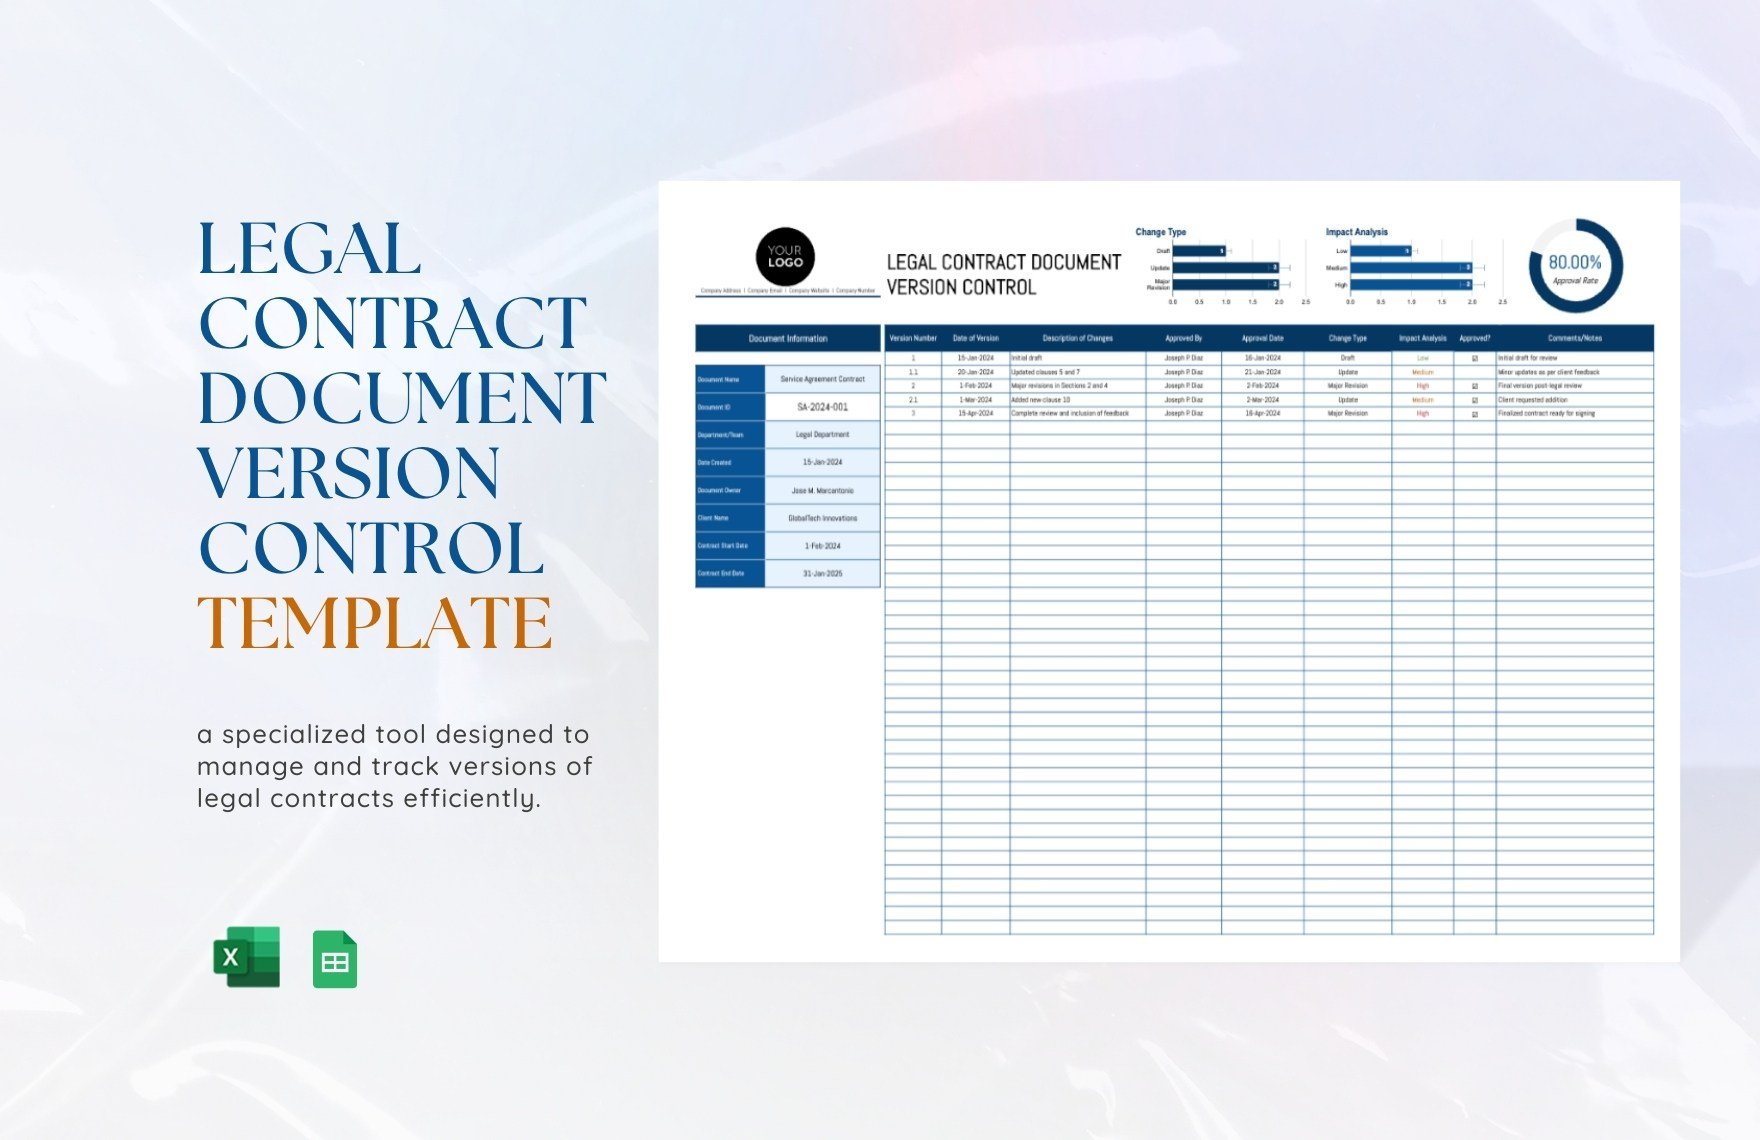 Legal Contract Document Version Control Template in Excel, Google Sheets